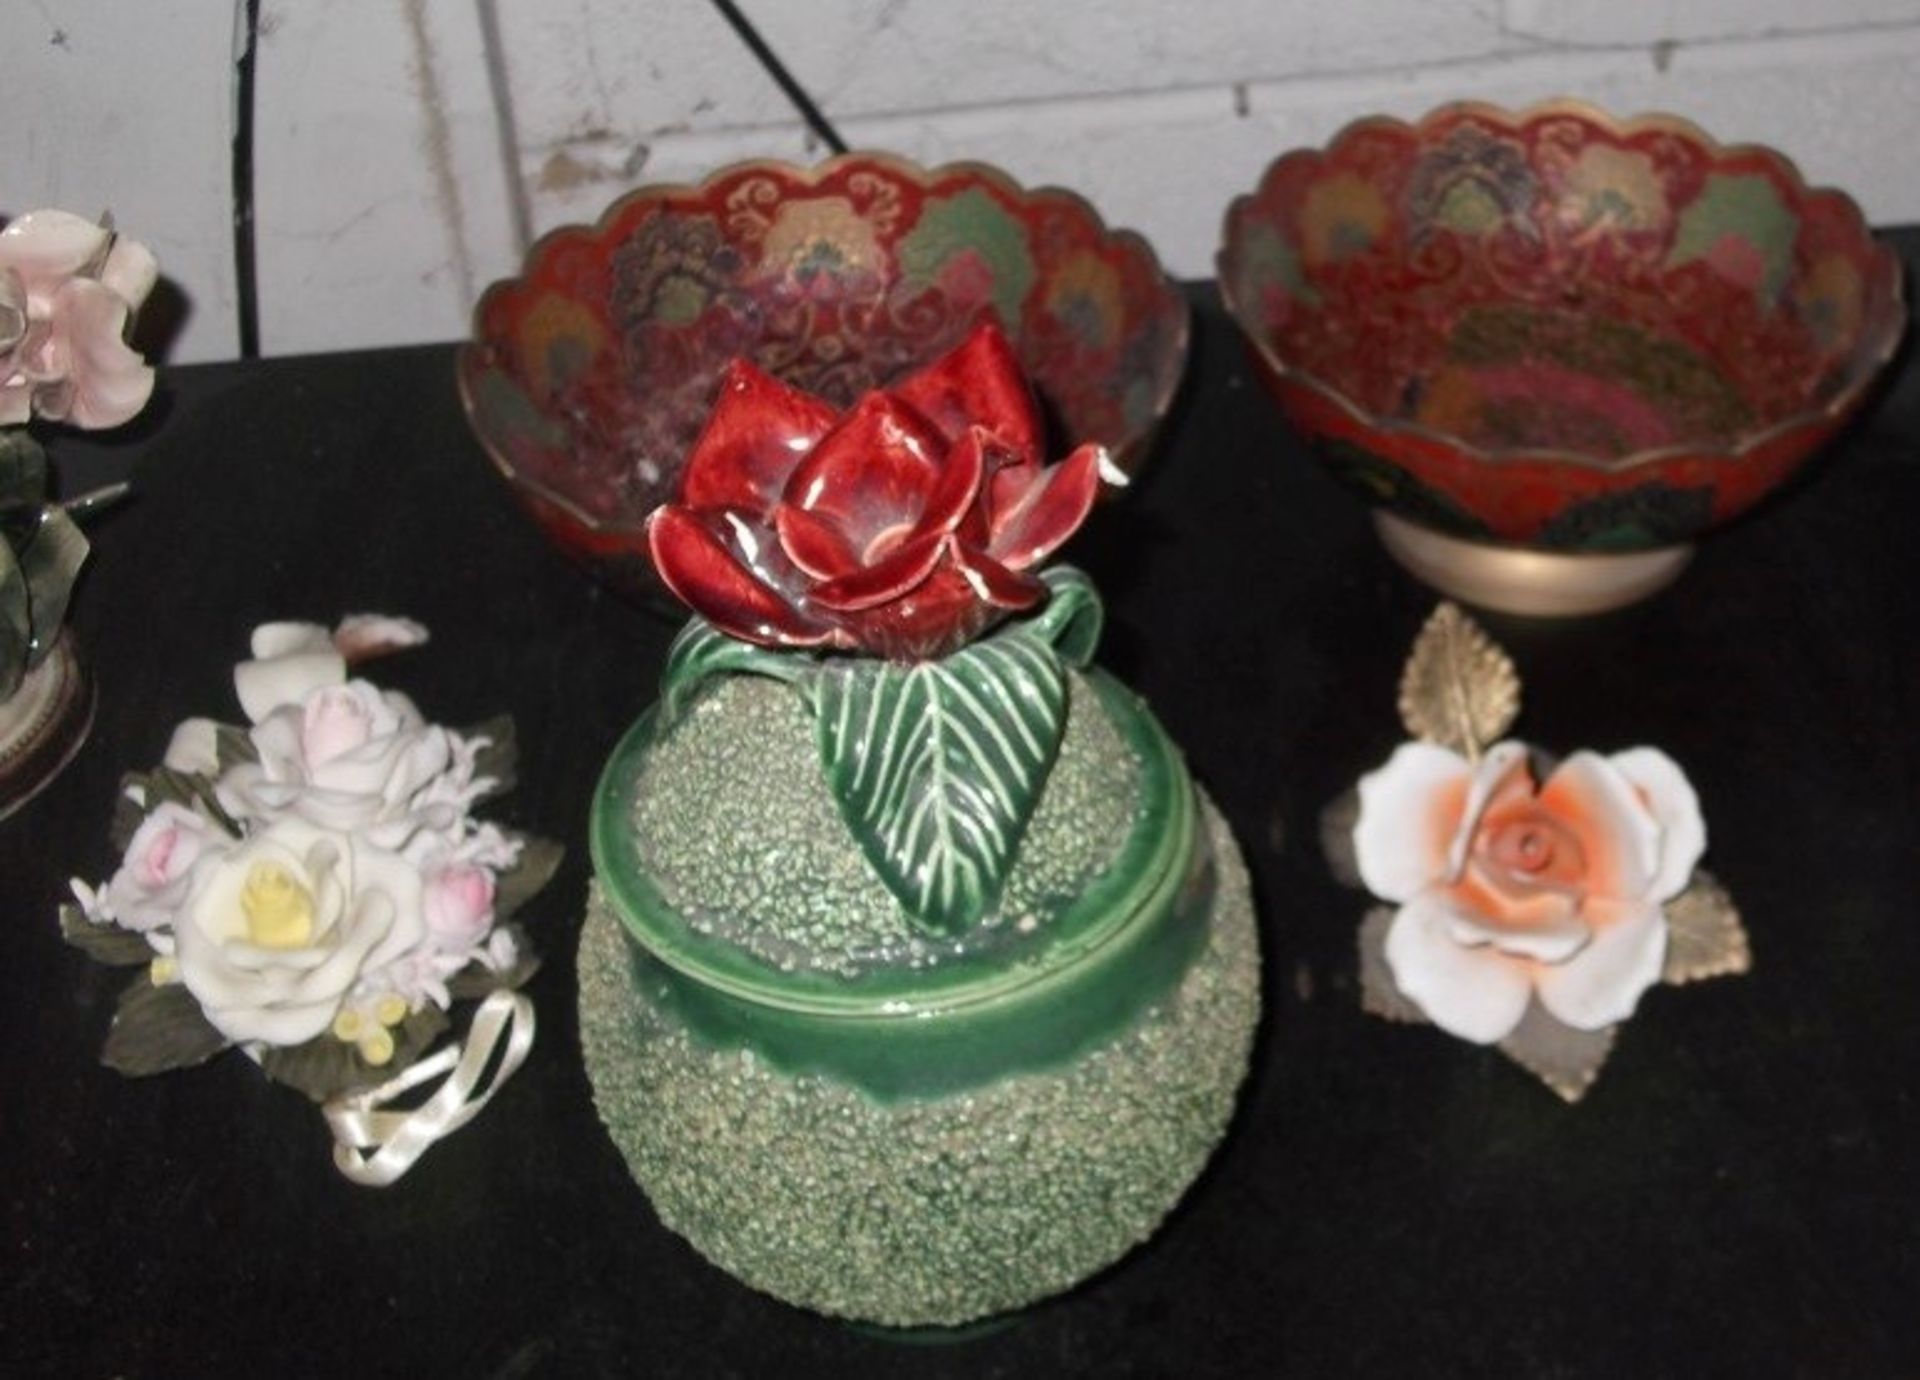 37 x Assorted Decorative Items - Ceramics / Ornaments / Figurines - Pre-Loved, Mostly Of American - Image 5 of 8